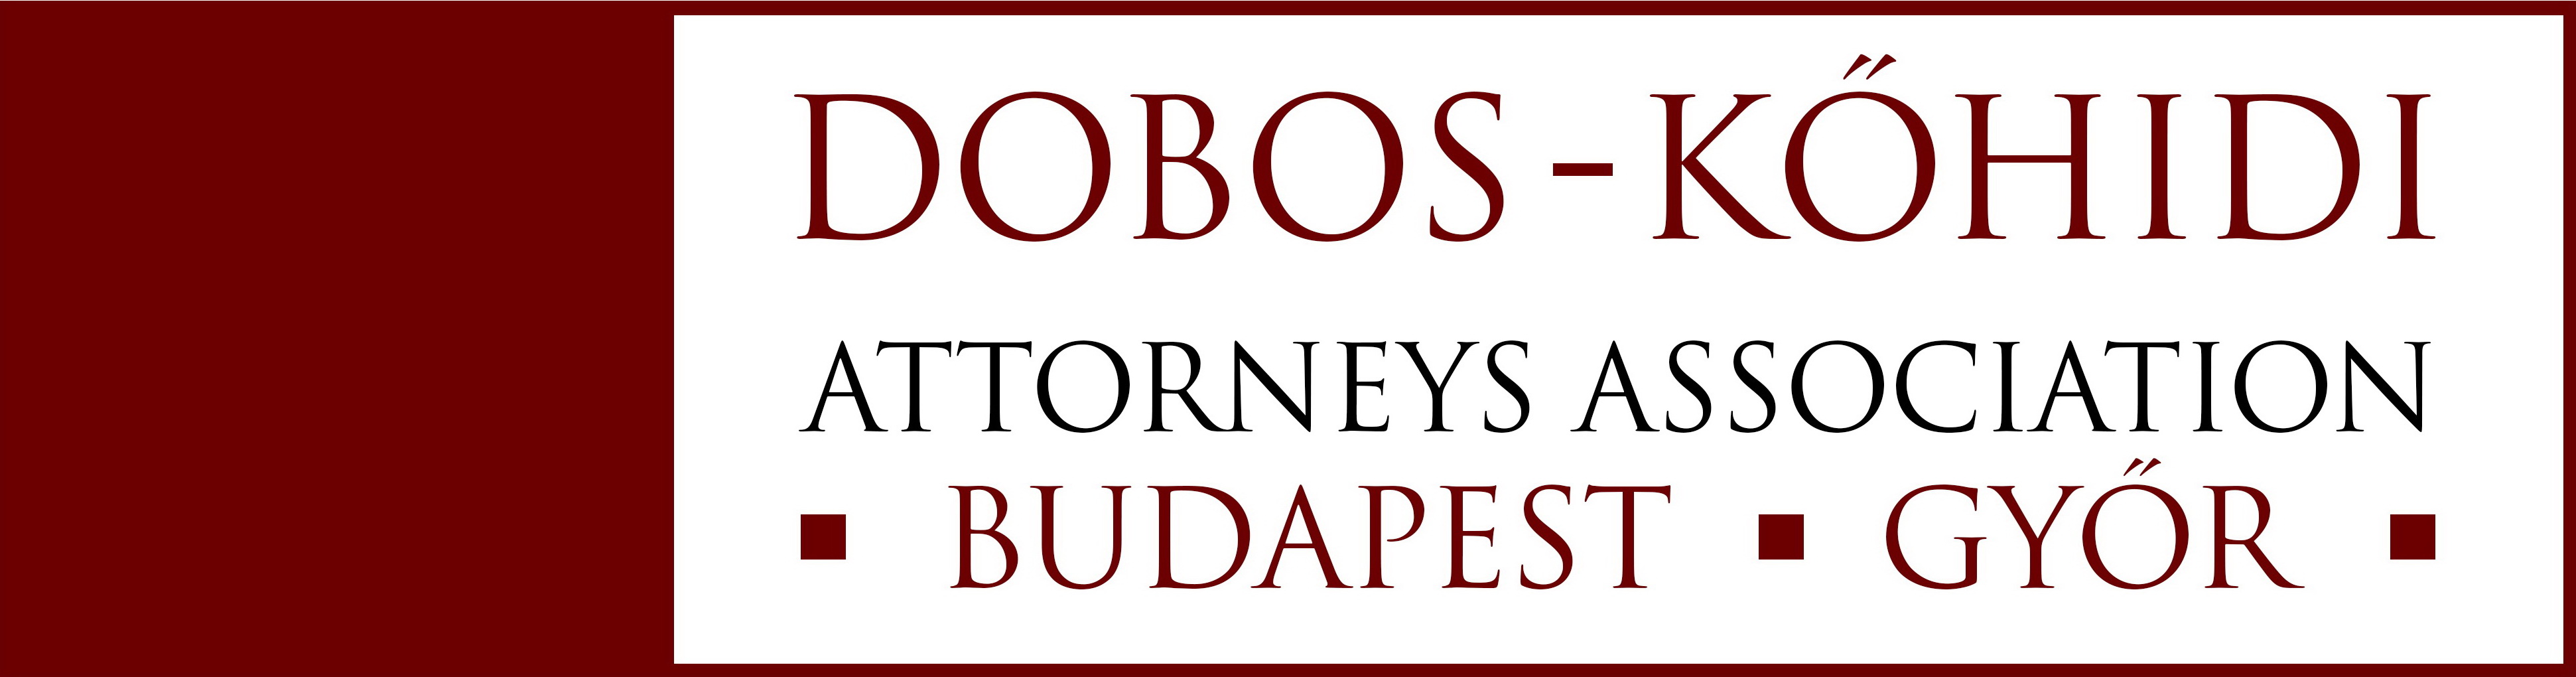 Our Legal Association provides a comprehensive economic law service for businesses on Budapest-Győr-Wien axis and its surrounding regions.